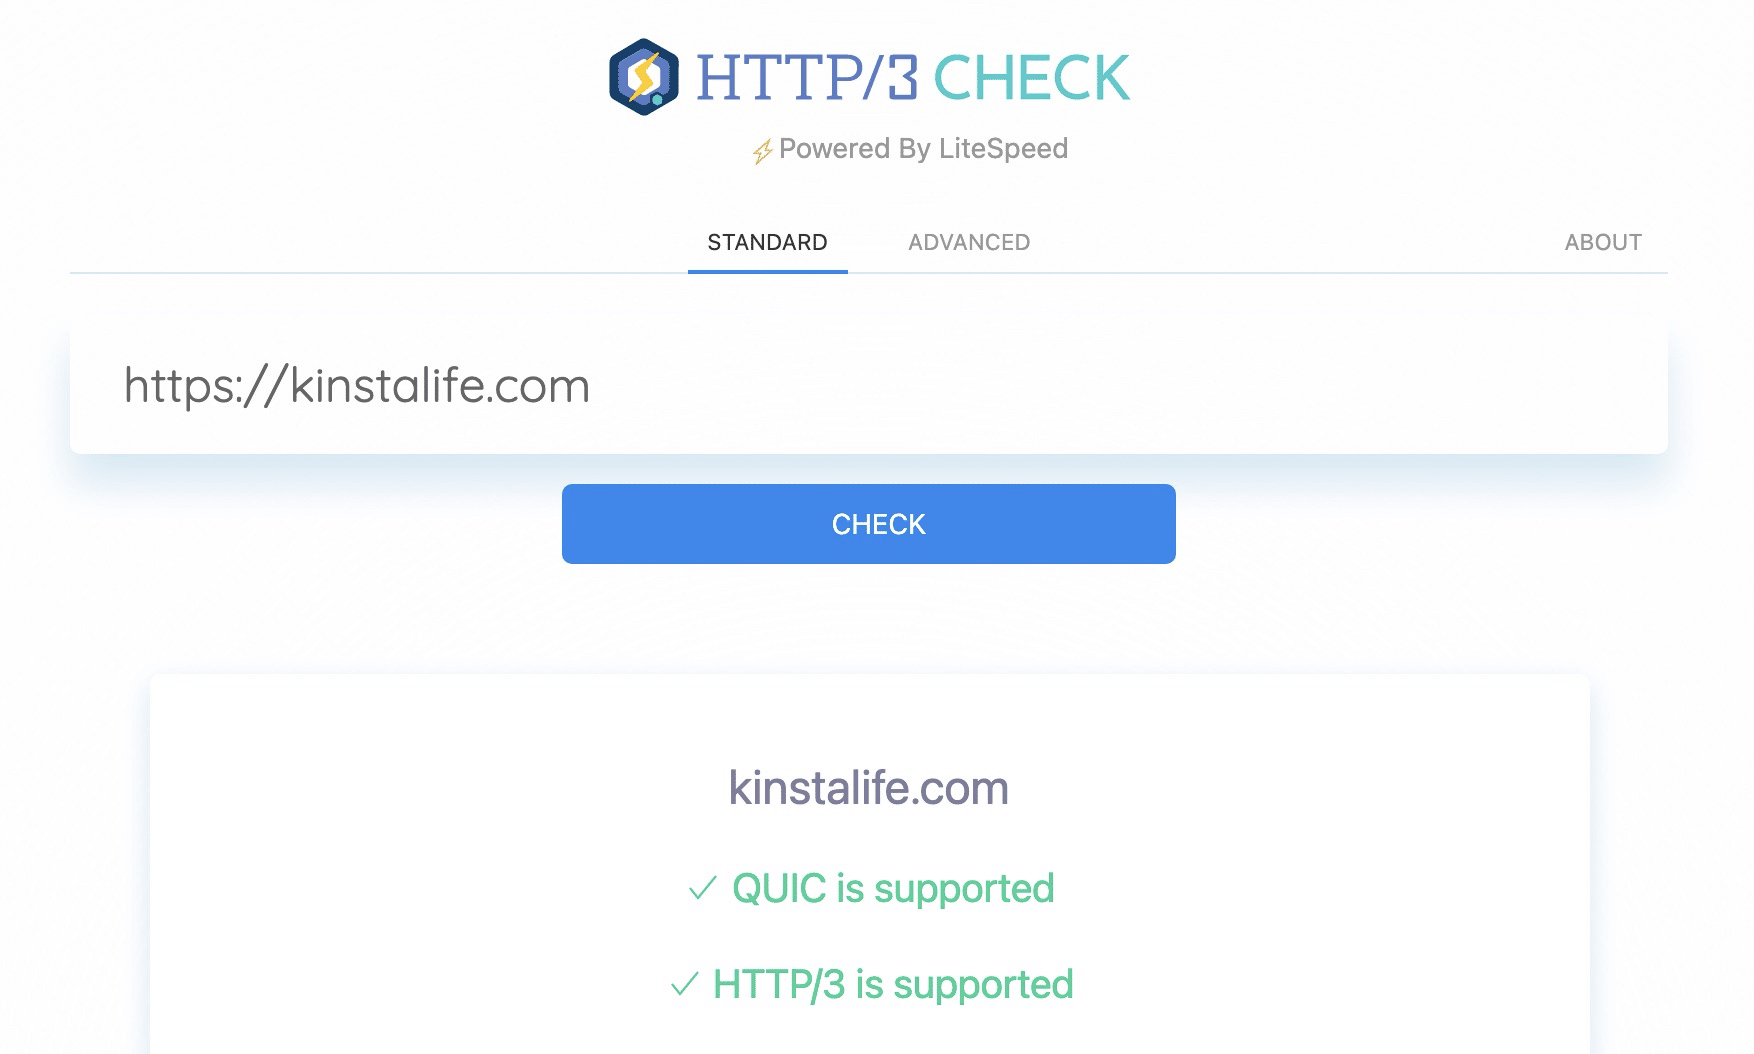 Sites hosted on Kinsta support HTTP/3 for faster SSL handshakes.